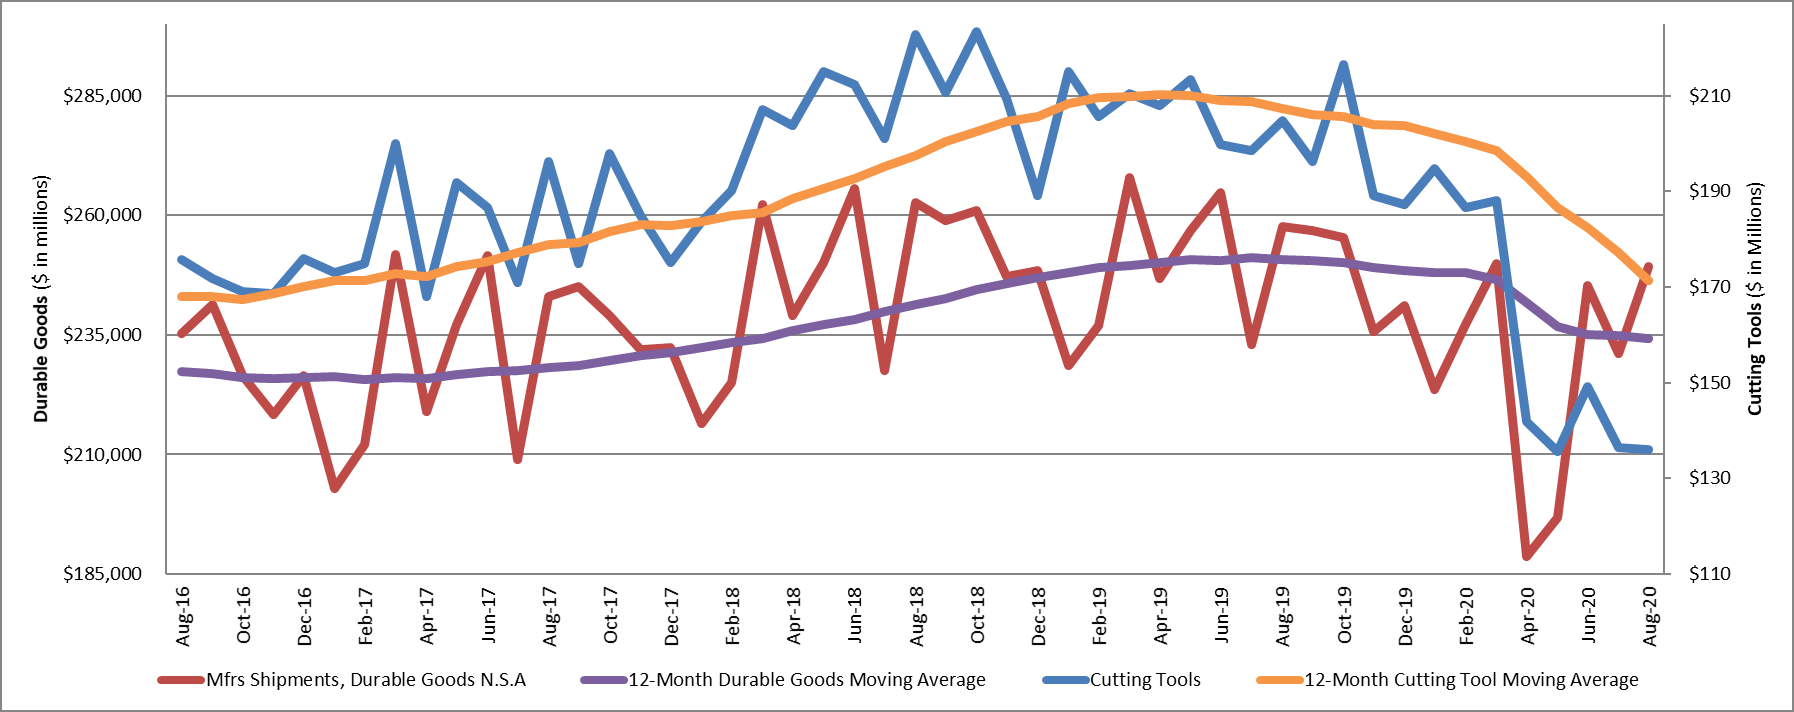 The graph below includes the 12-month moving average for the durable goods shipments and cutting tool orders. These values are calculated by taking the average of the most recent 12 months and plotting them over time.